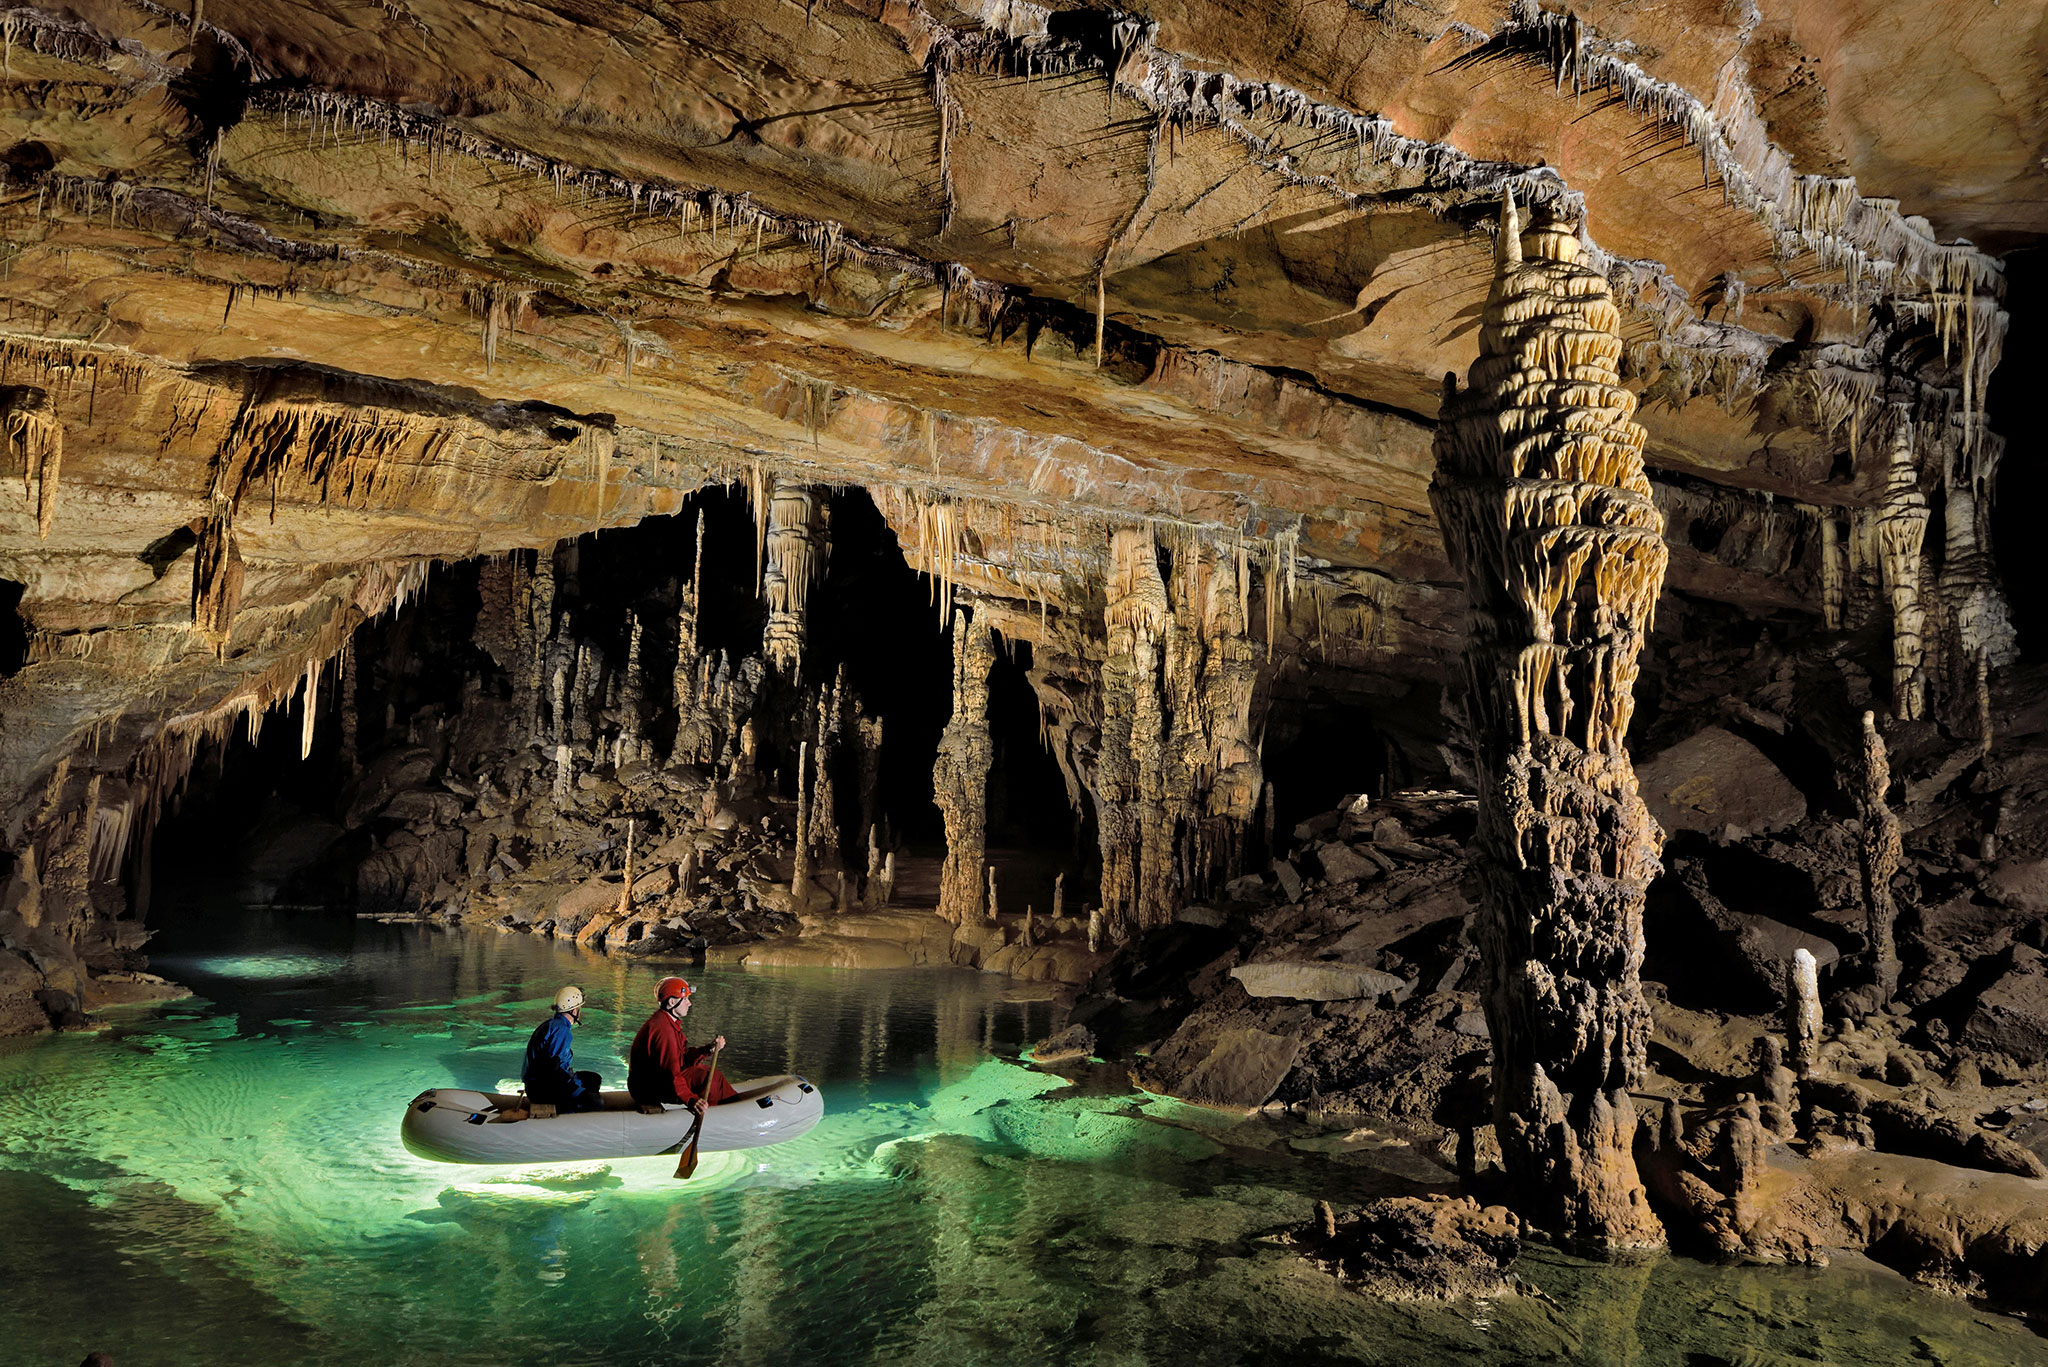 Images of Secret River Caves in Slovenia, Eastern Europe